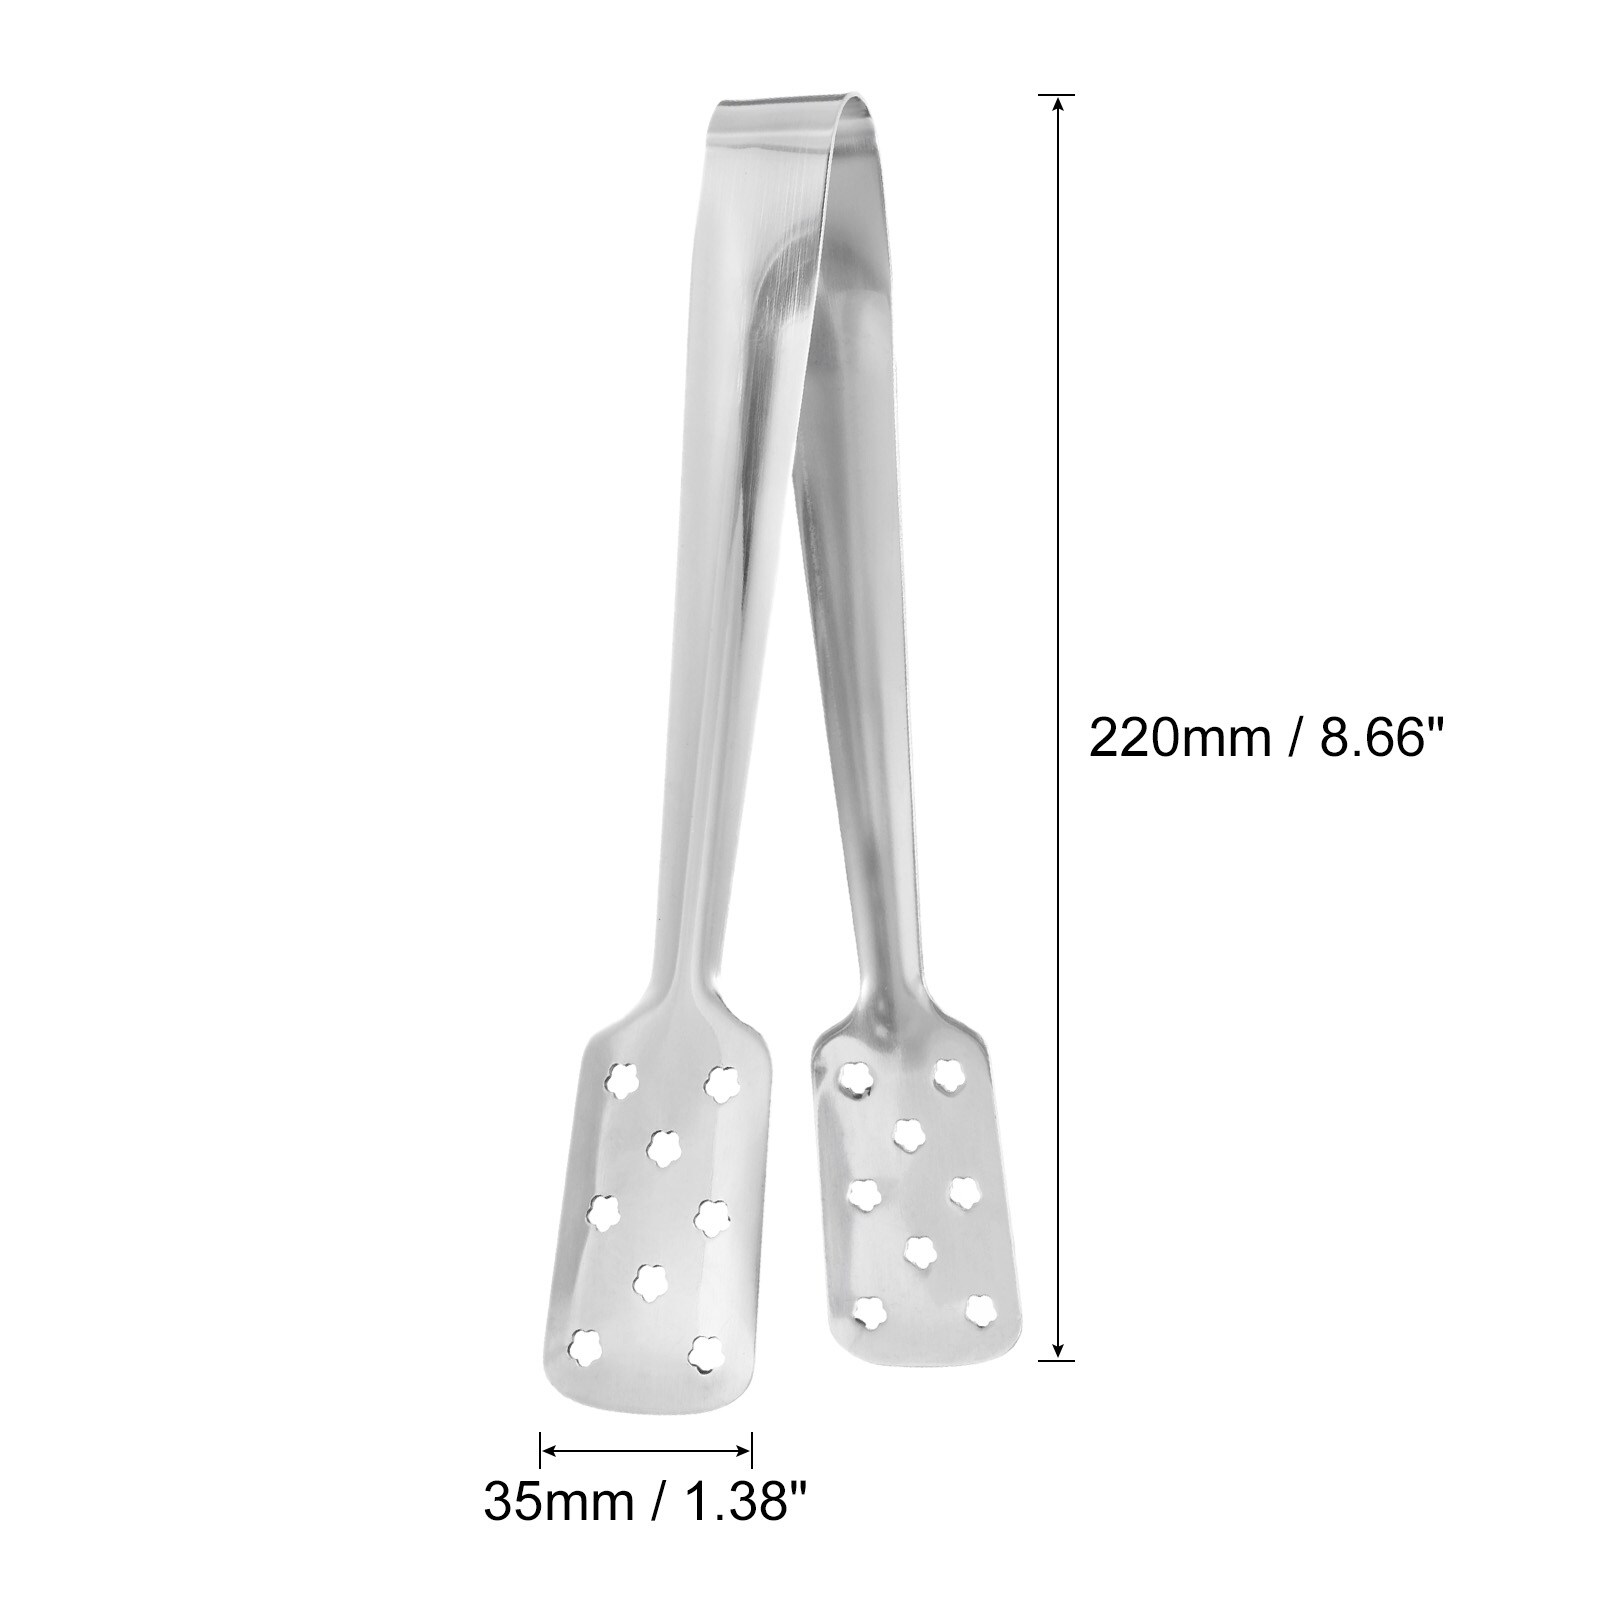 https://ak1.ostkcdn.com/images/products/is/images/direct/b7546d0d95edca9be9f542cf16acdb990e9bec56/Serving-Tongs%2C-2pcs-9-Inch---Stainless-Steel-Ice-Tong-for-Bar%2C-Cafe.jpg